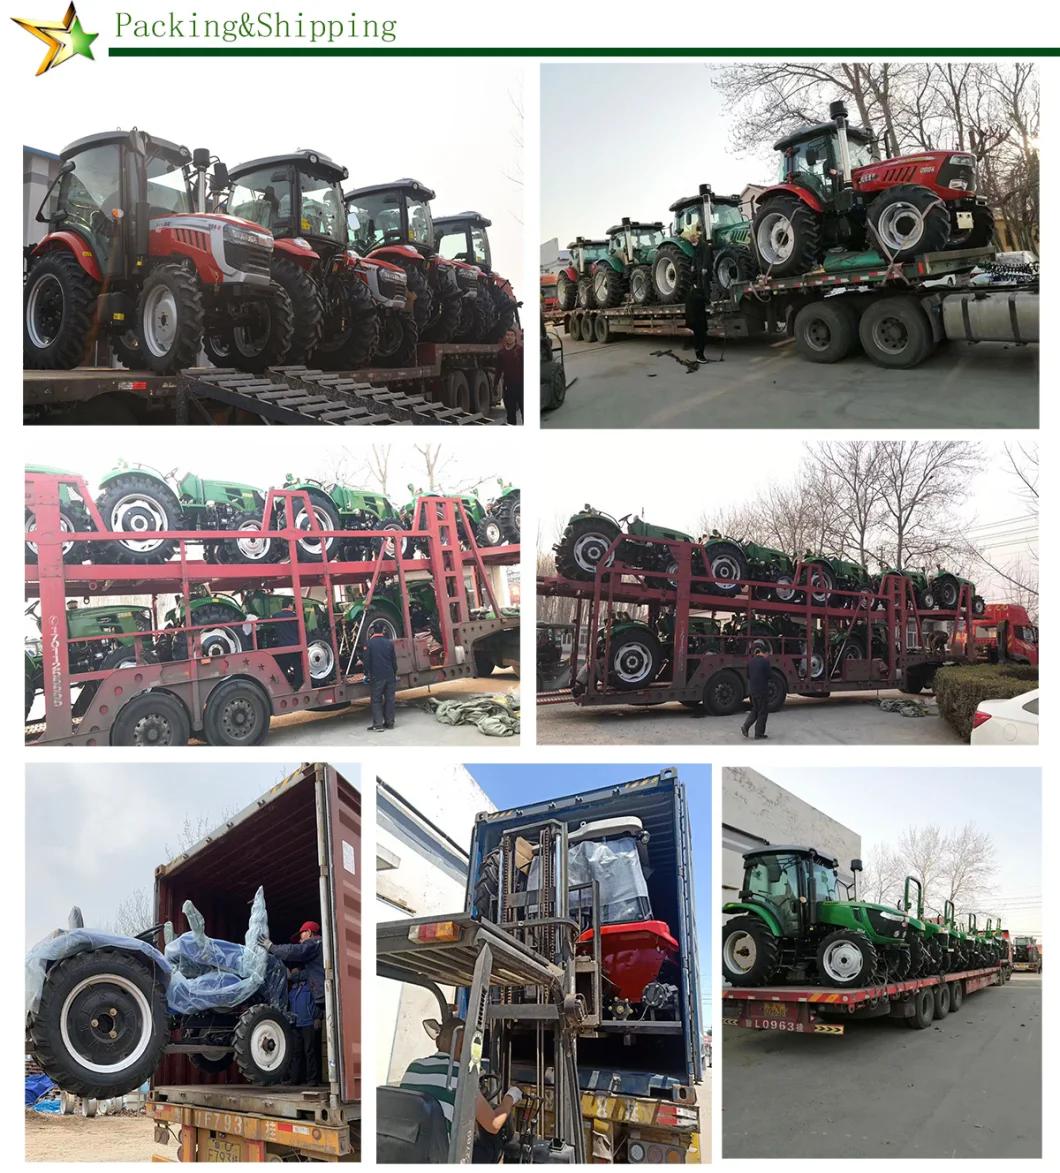 China Machinery Manufacturer Cheap Price Big Farm Tractor /2004 200HP Tractor/ 4WD Farm Backhoe with Cab Mk2004-1